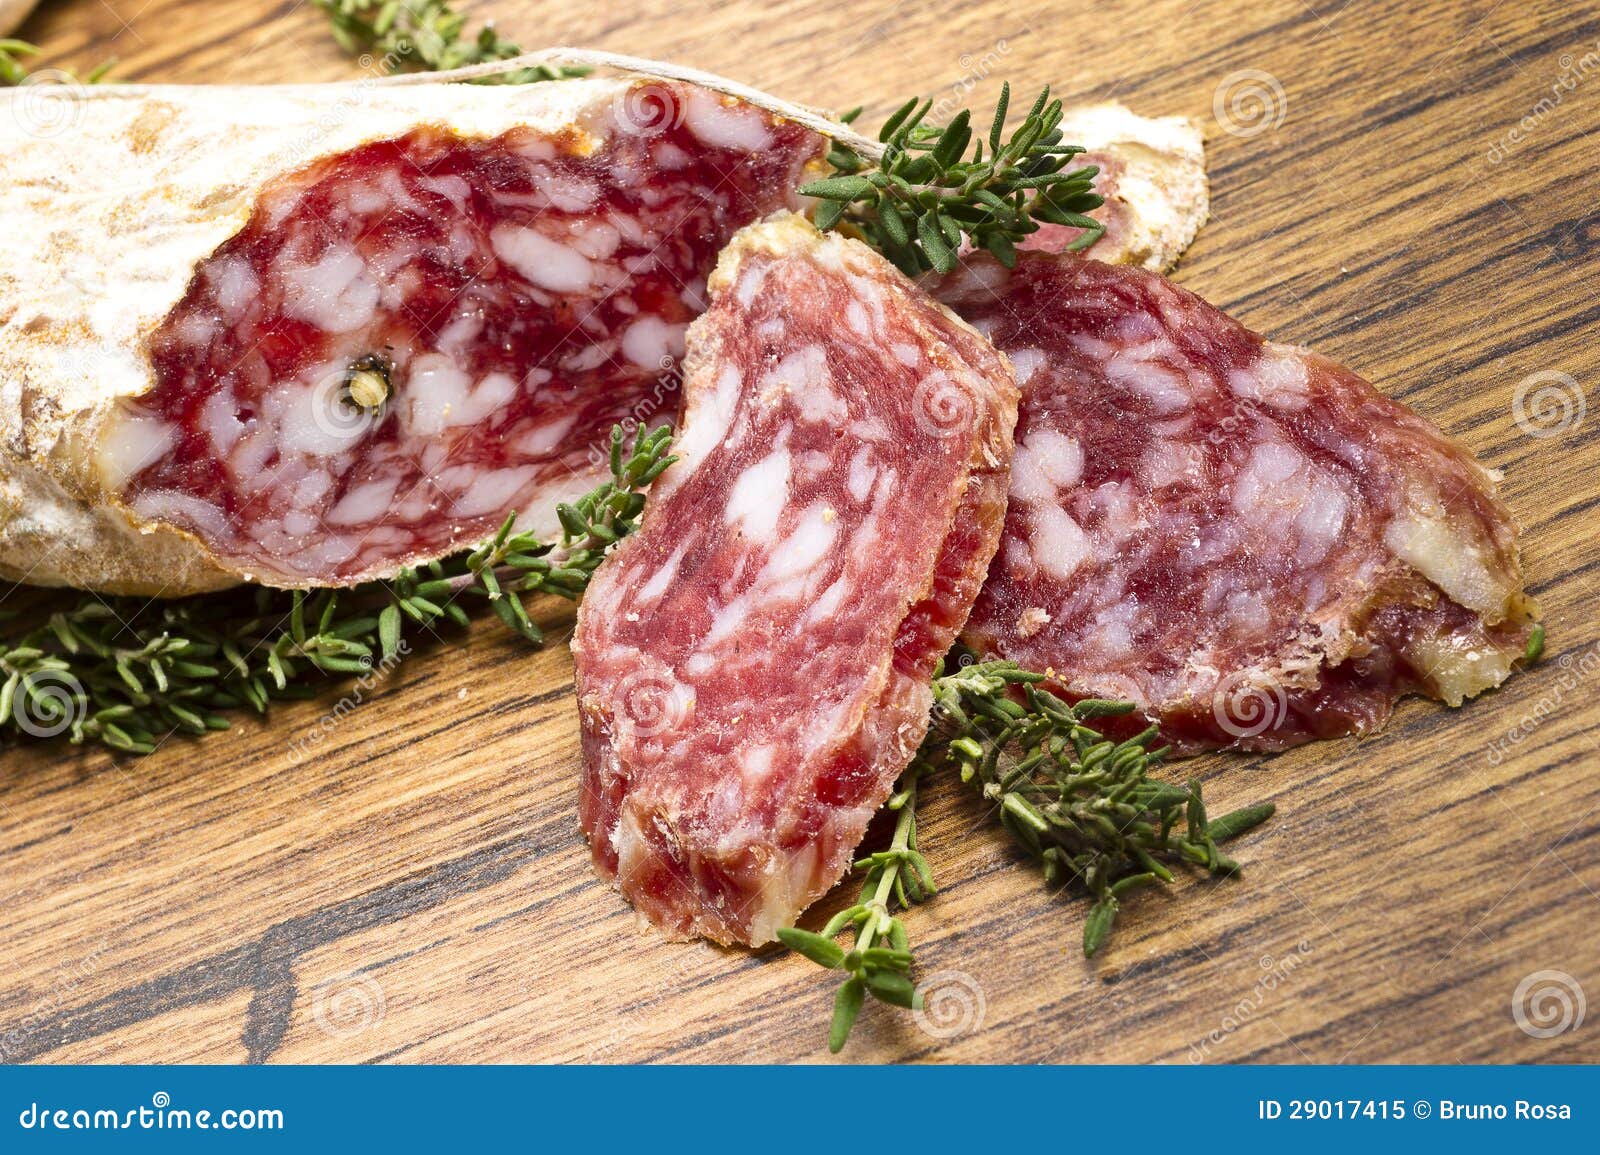 slices of salame from italy